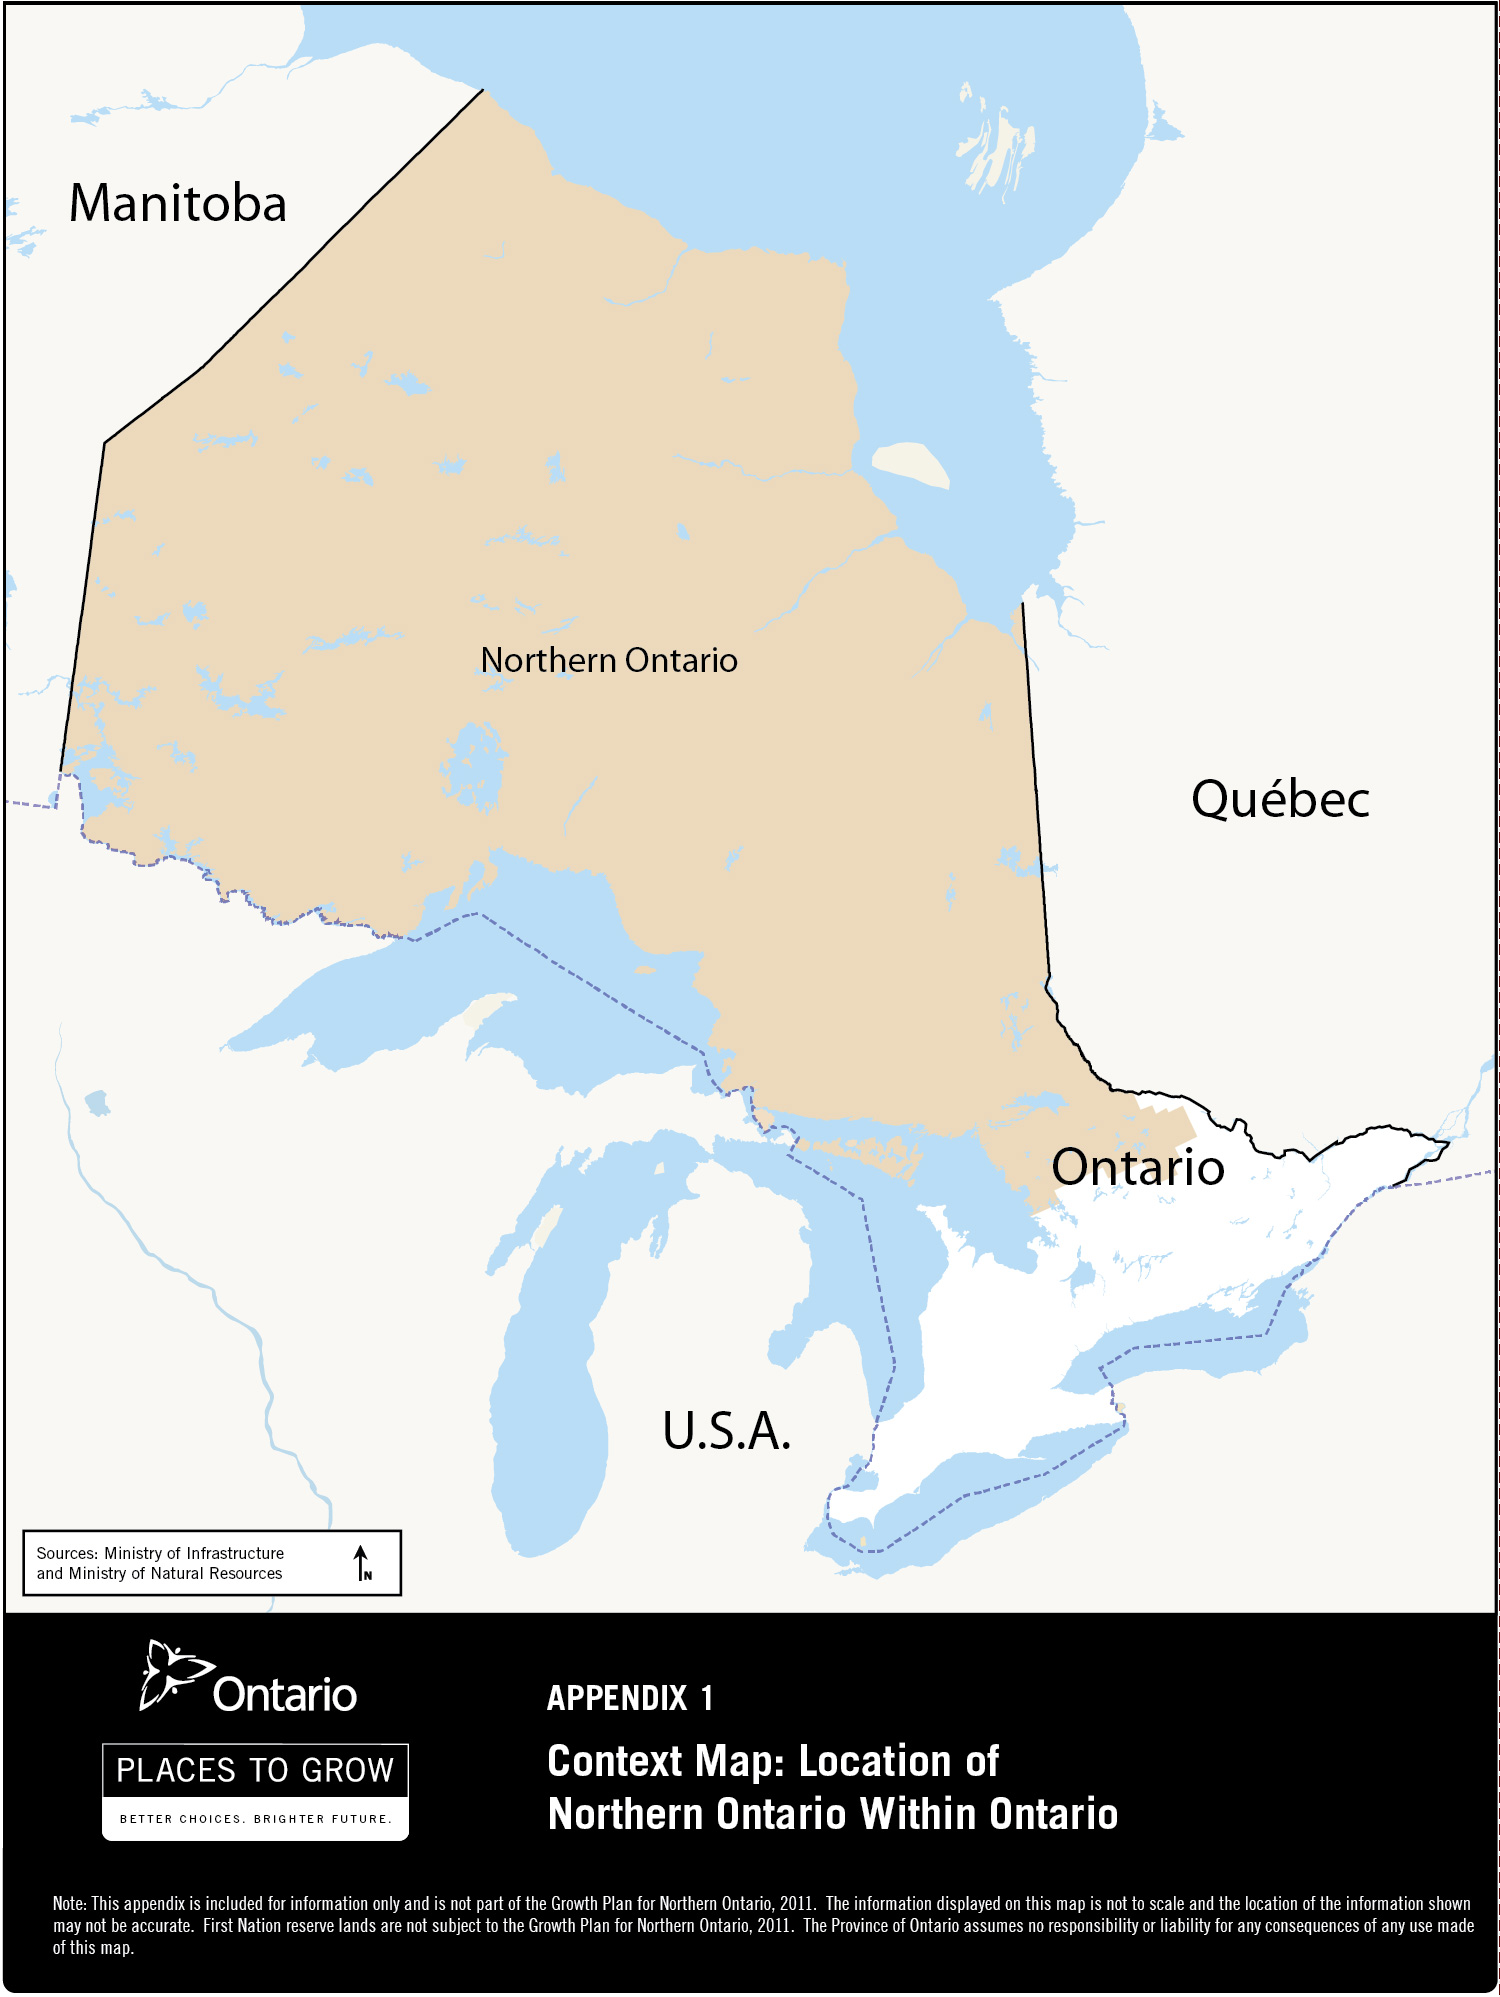 Context Map: Location of Northern Ontario Within Ontario